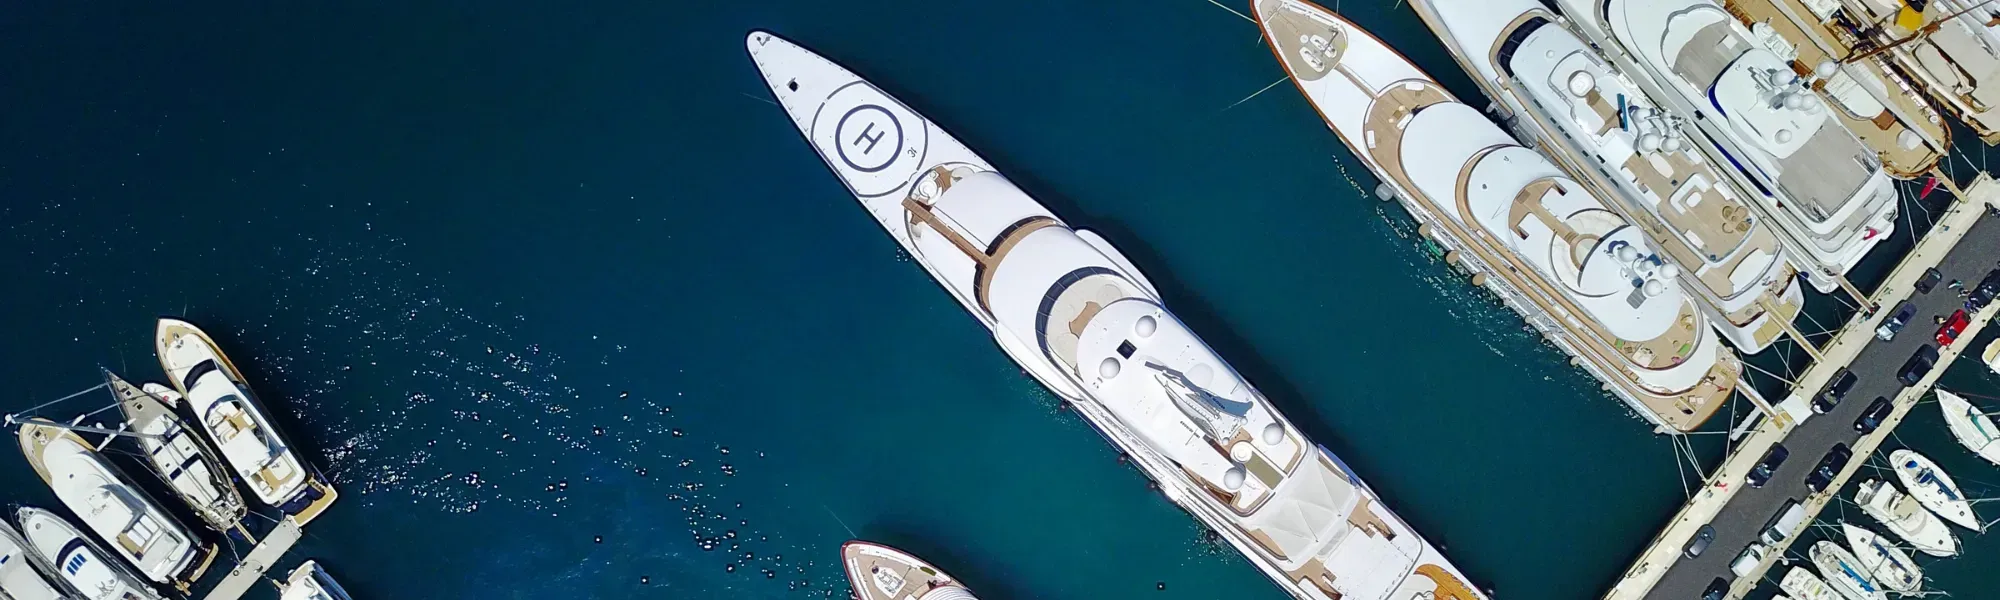 Superyacht Employment and Careers Report - Faststream Recruitment